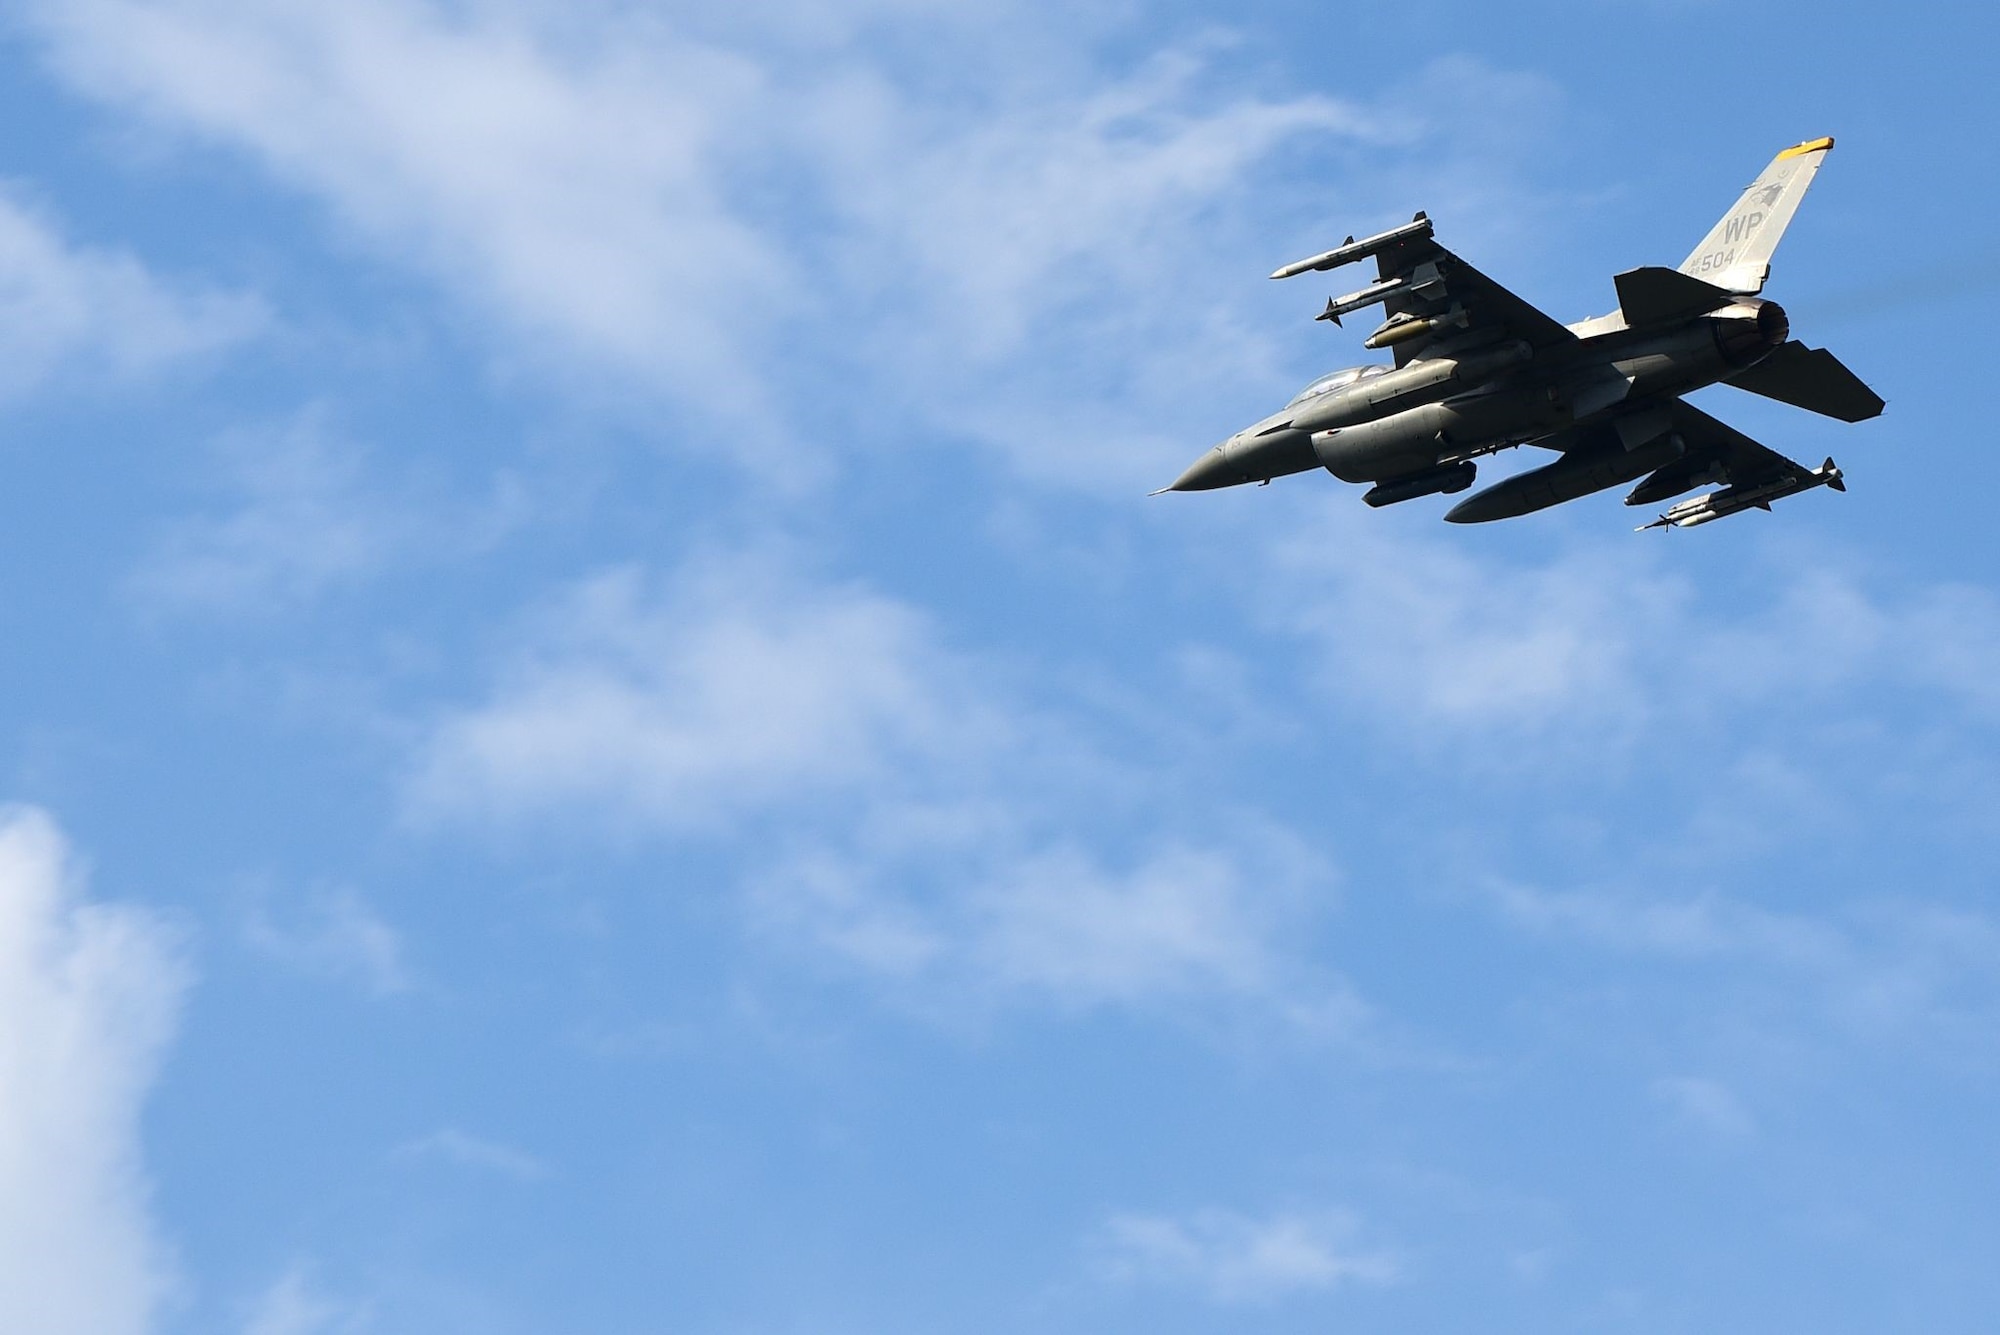 An F-16 Fighting Falcon flies over Eielson Air Force Base, Alaska during Red Flag-Alaska 21-2 at Eielson AFB, Alaska, June 17, 2021. RF-A reinforces the United States’ continued commitment to the region as a Pacific nation, leader and power. (U.S. Air Force photo by Senior Airman Suzie Plotnikov)